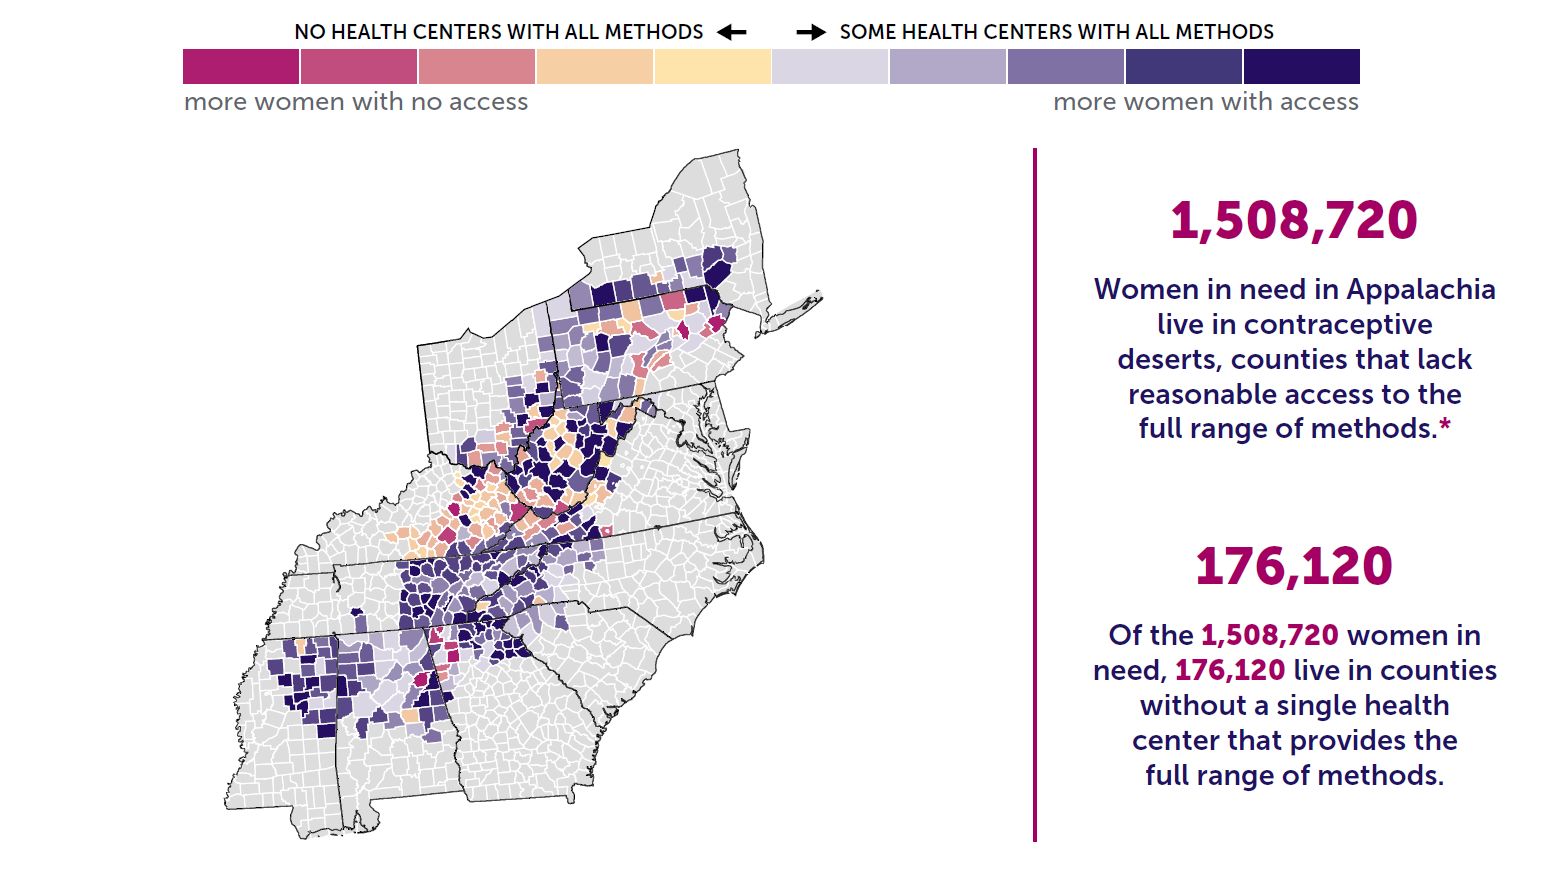 A map of the region of Appalachia and the state of contraceptive access by county. 